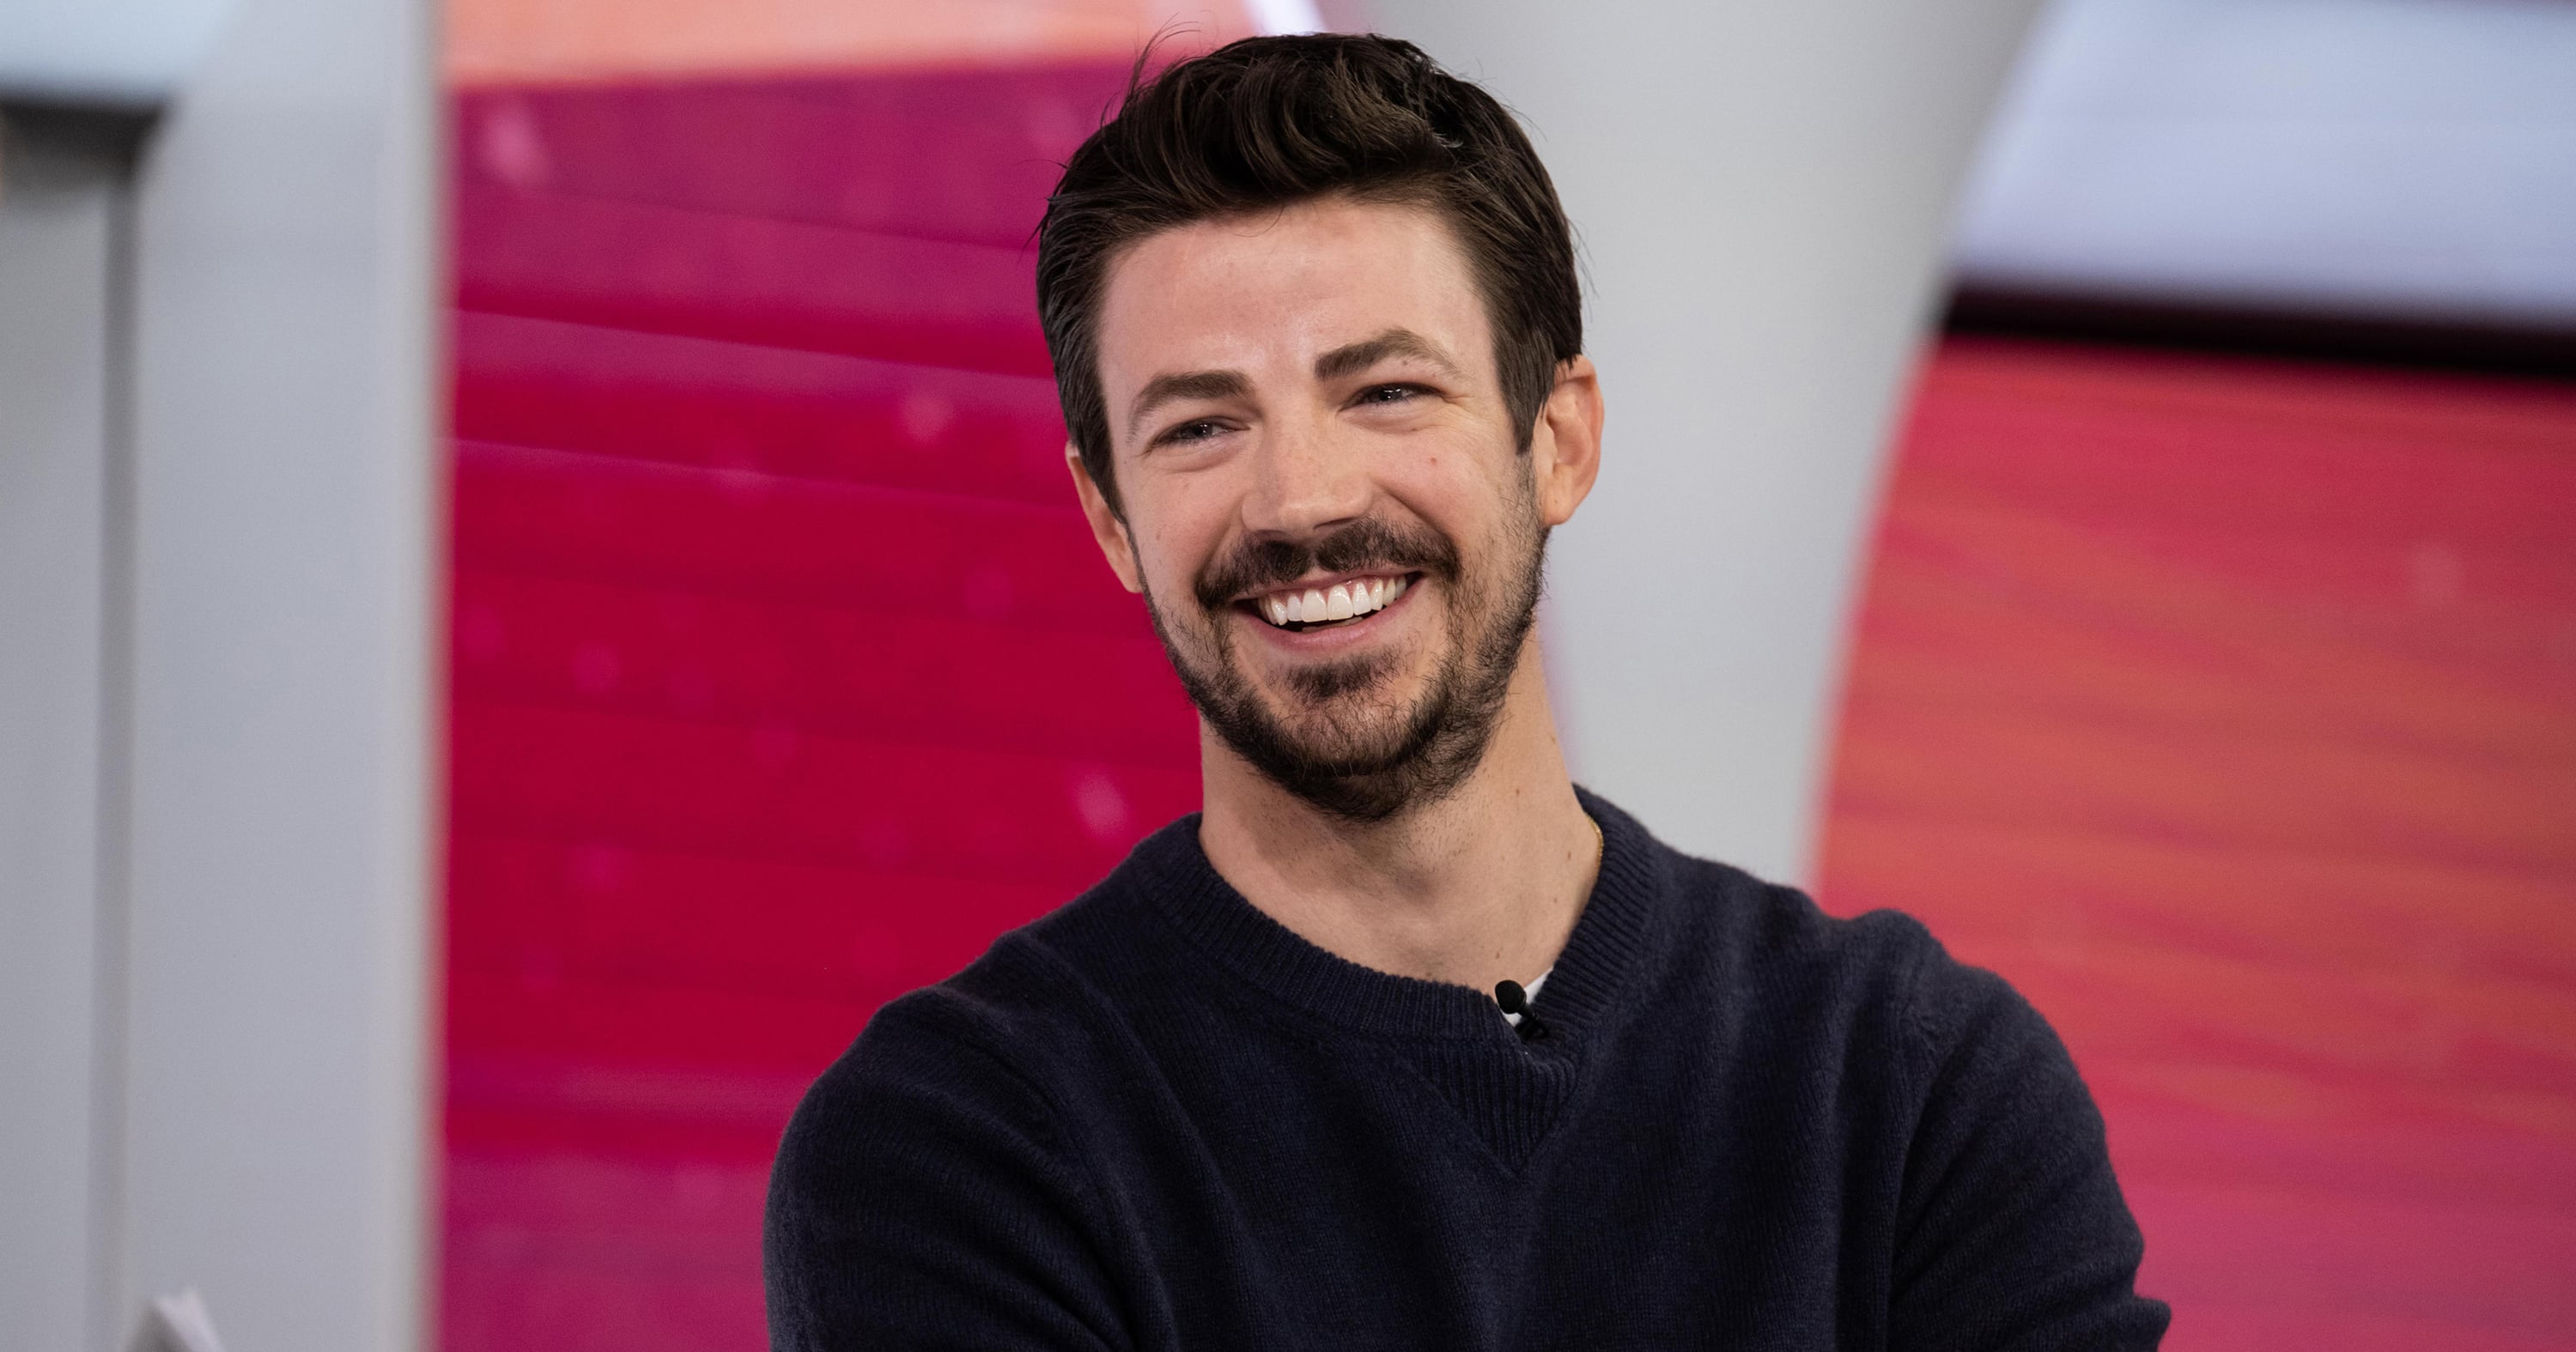 Grant Gustin’s Short but Sweet Dating History